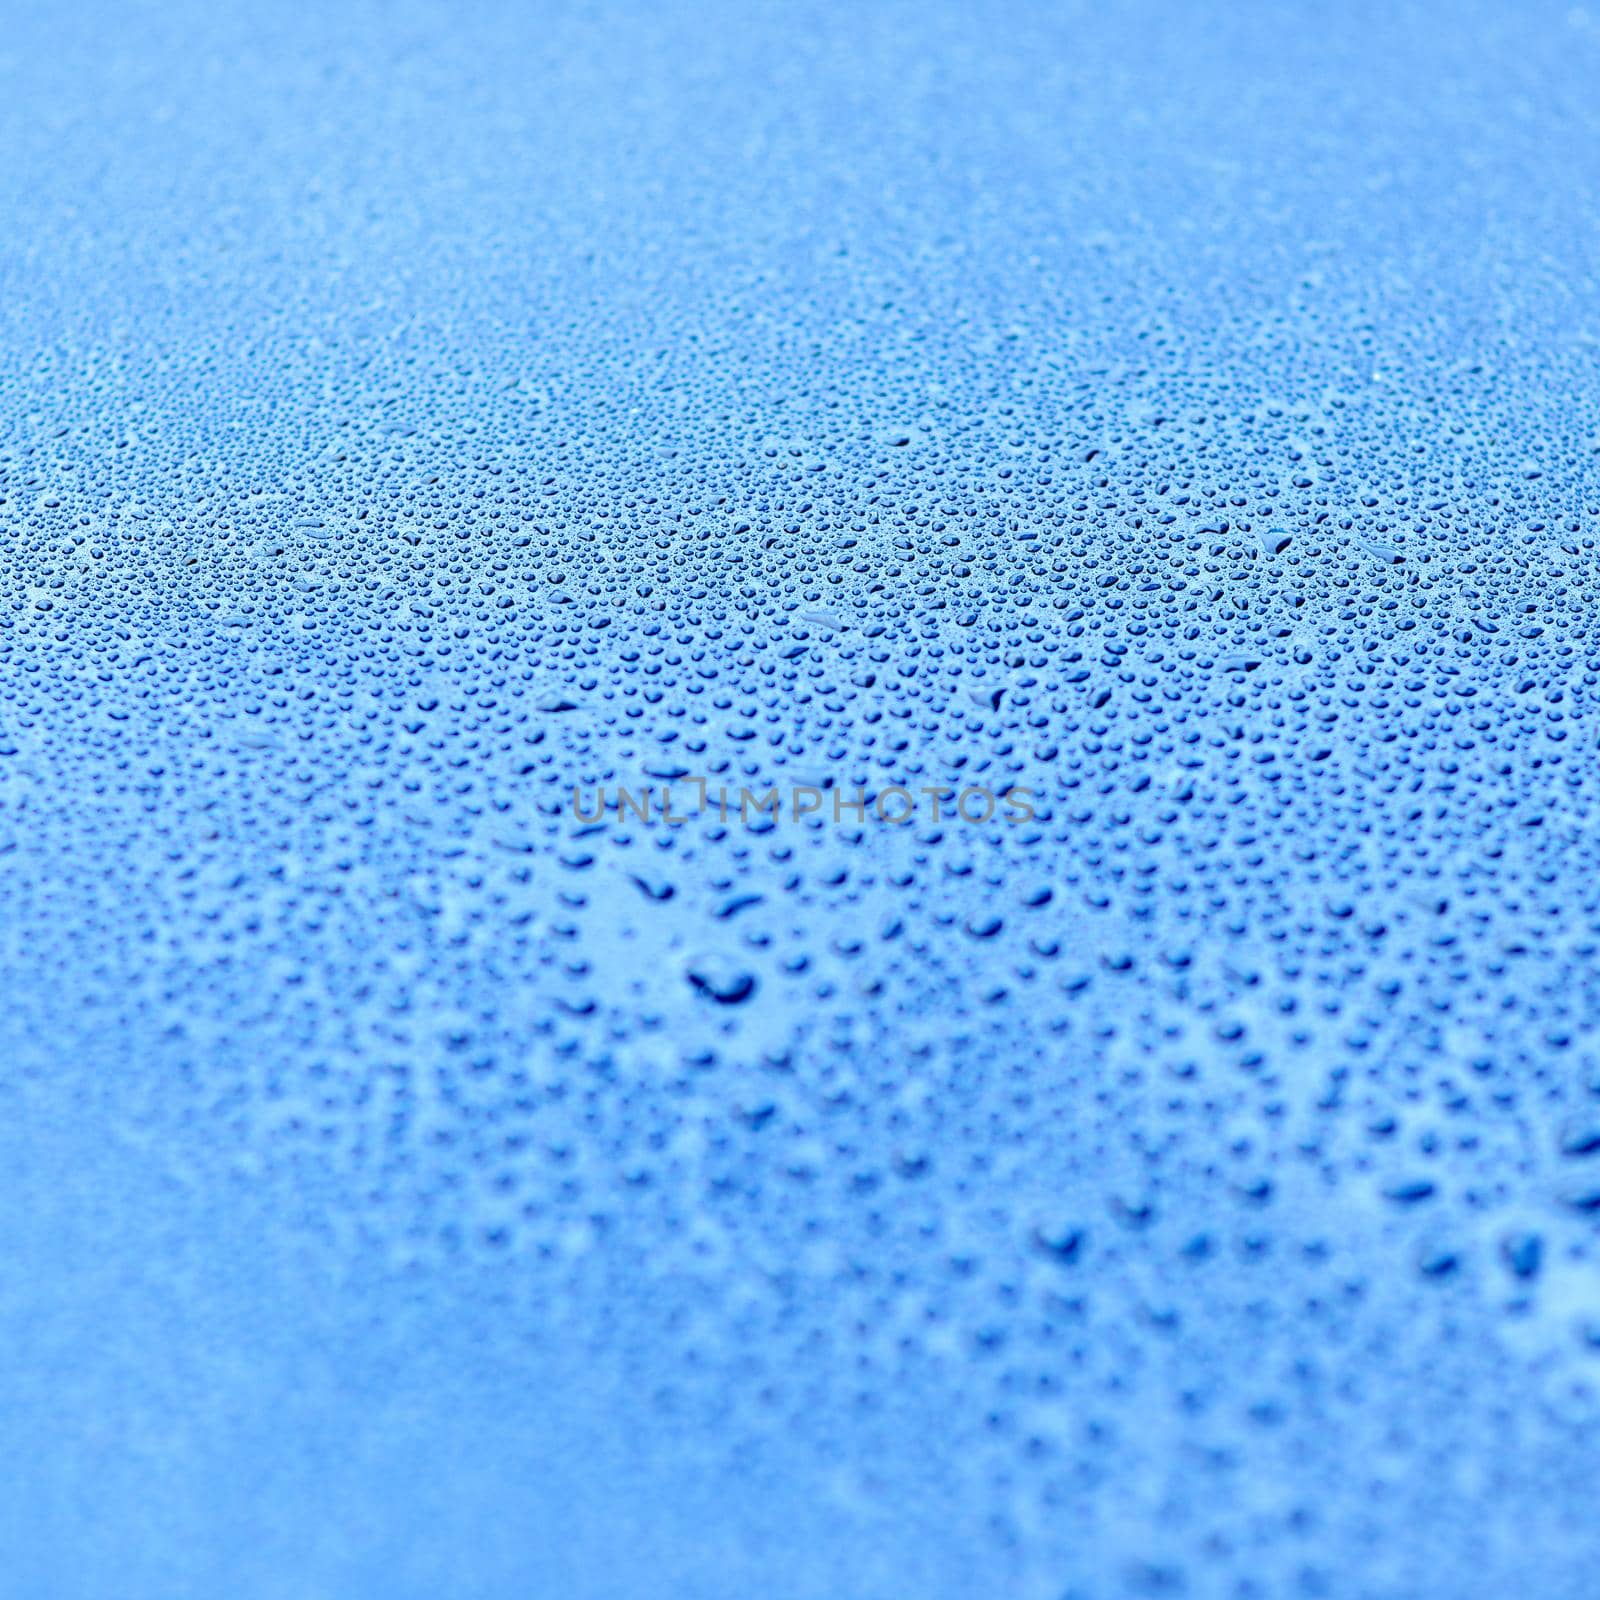 Shot of drops of water on a smooth surface.